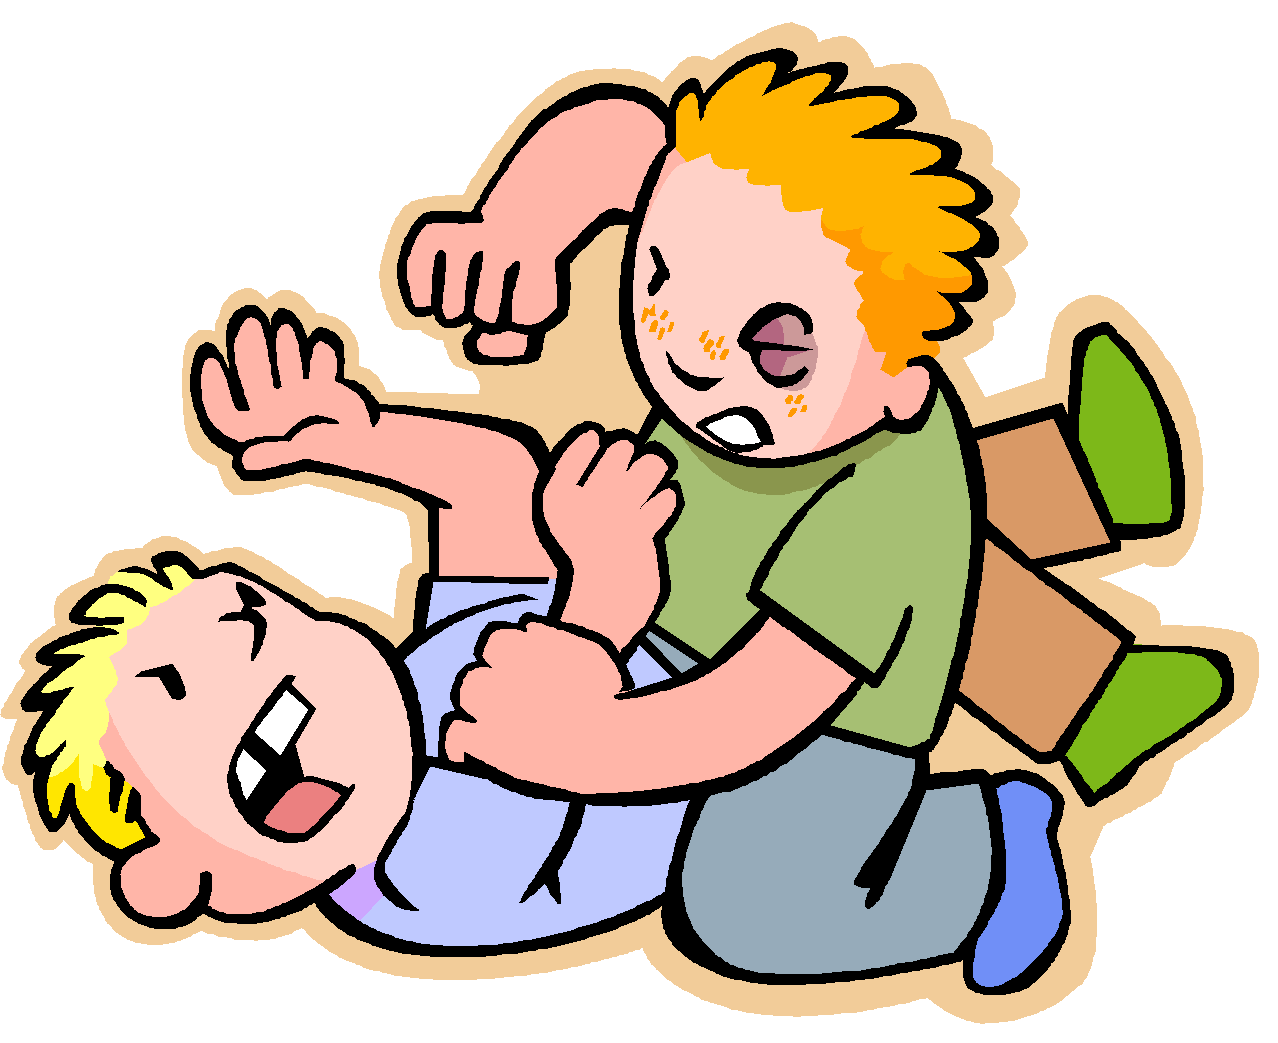  kids of the. Conflict clipart family fight